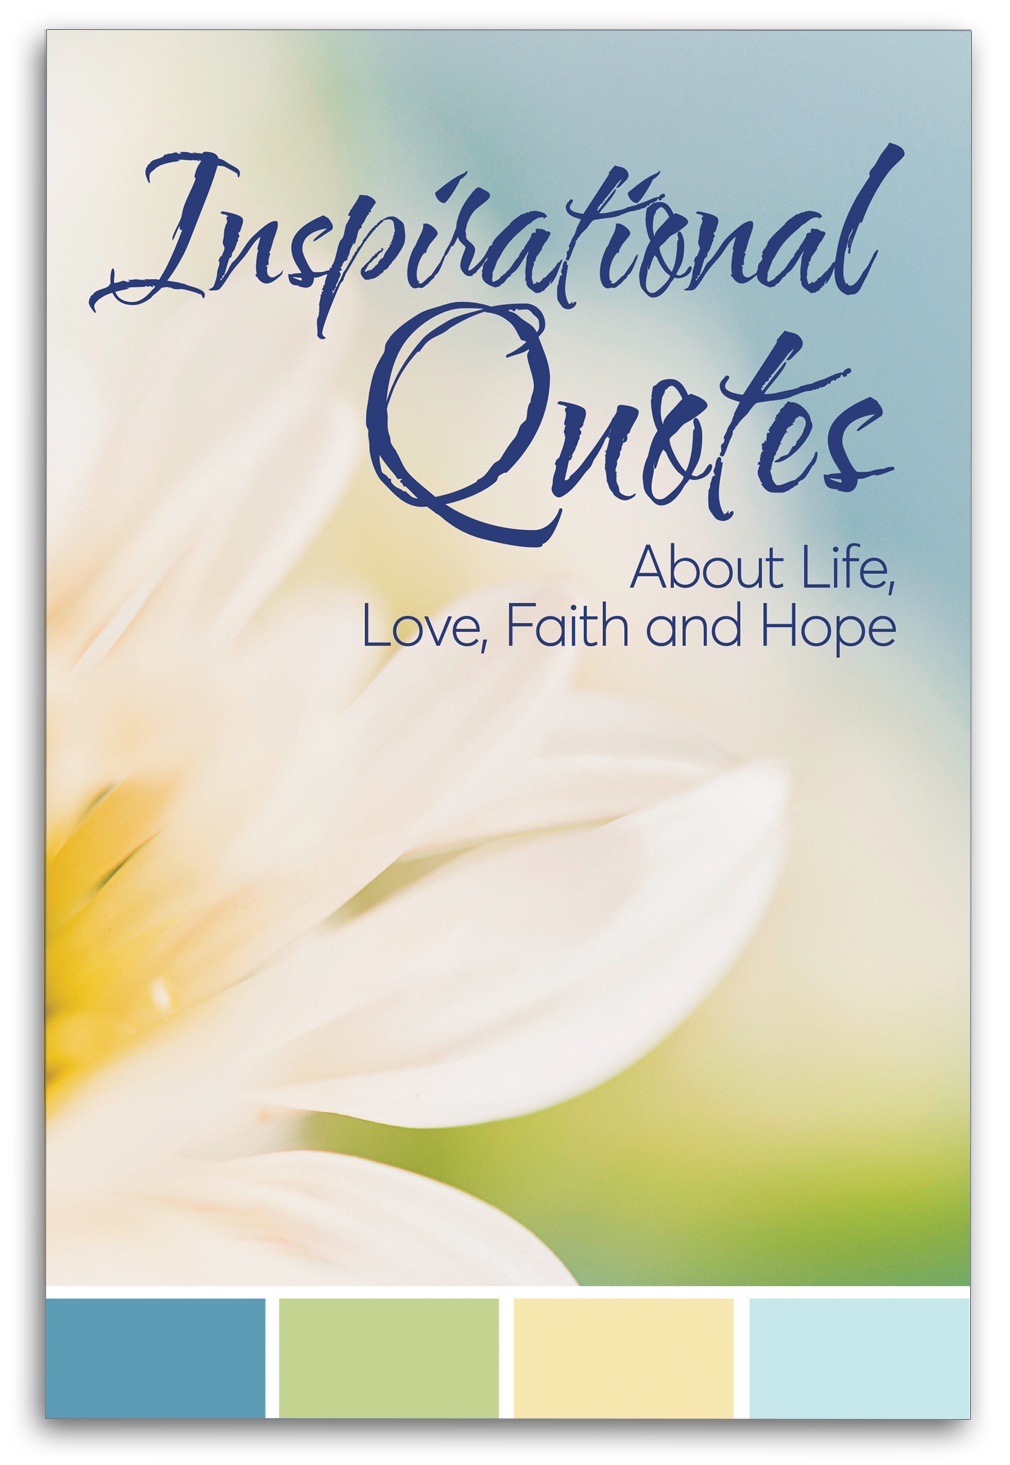 quotes about life cover photos